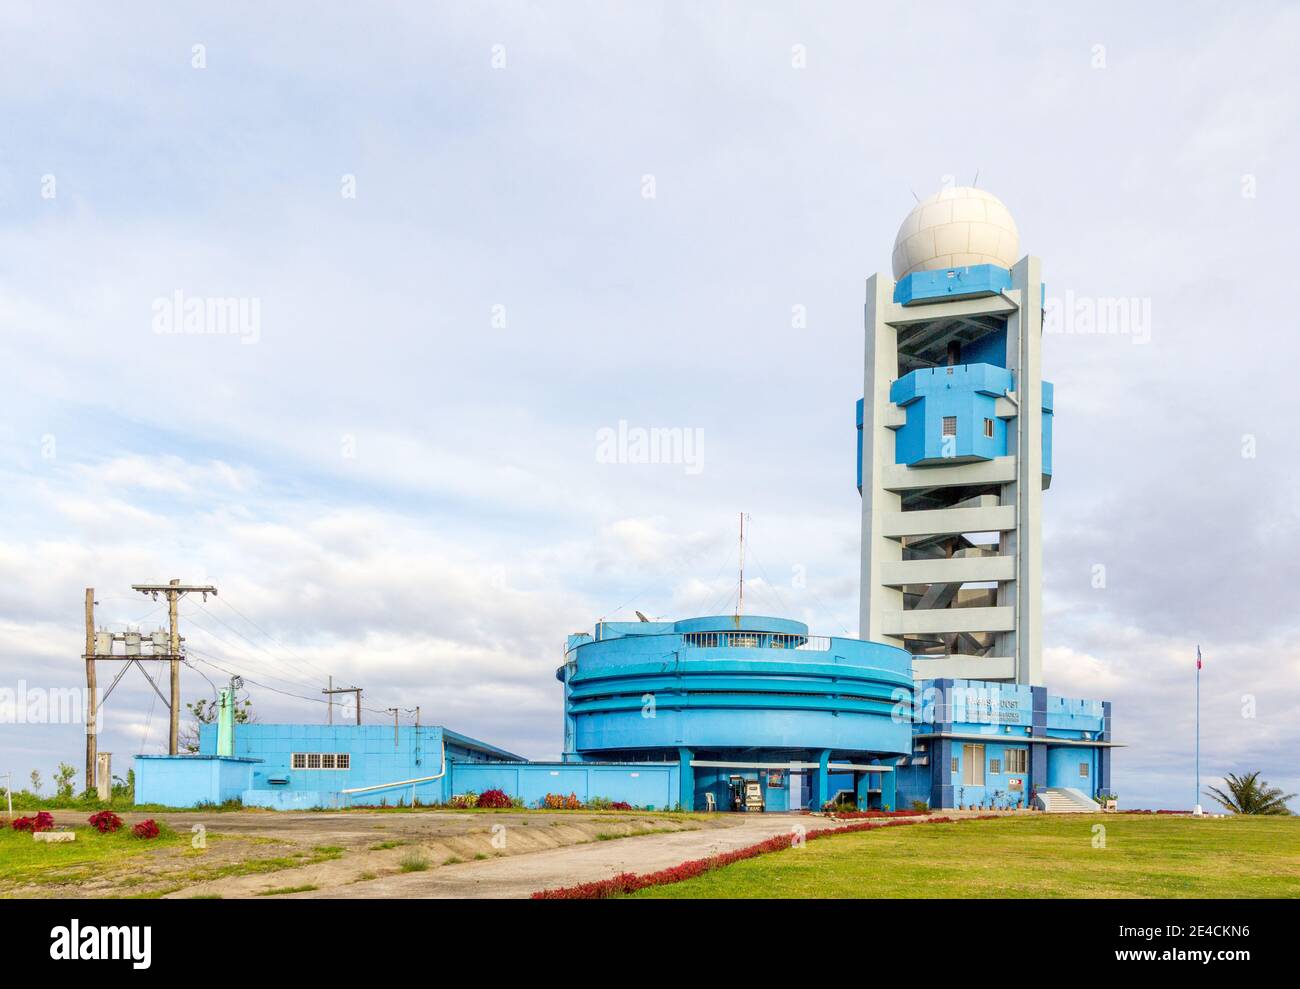 The PAGASA weather station in Catanduanes, Philippines Stock Photo